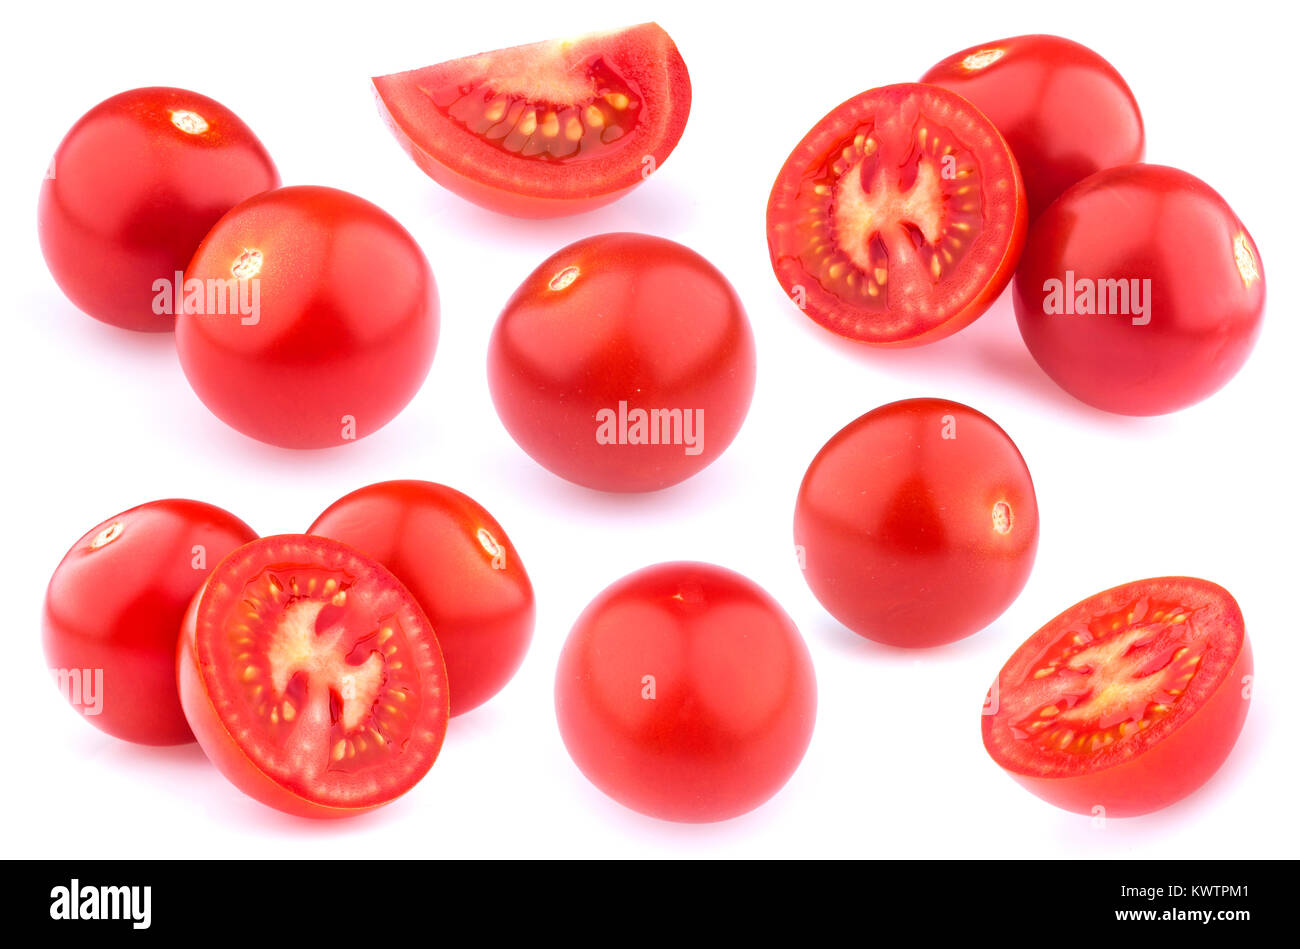 Cherry tomatoes isolated on white background. Collection Stock Photo